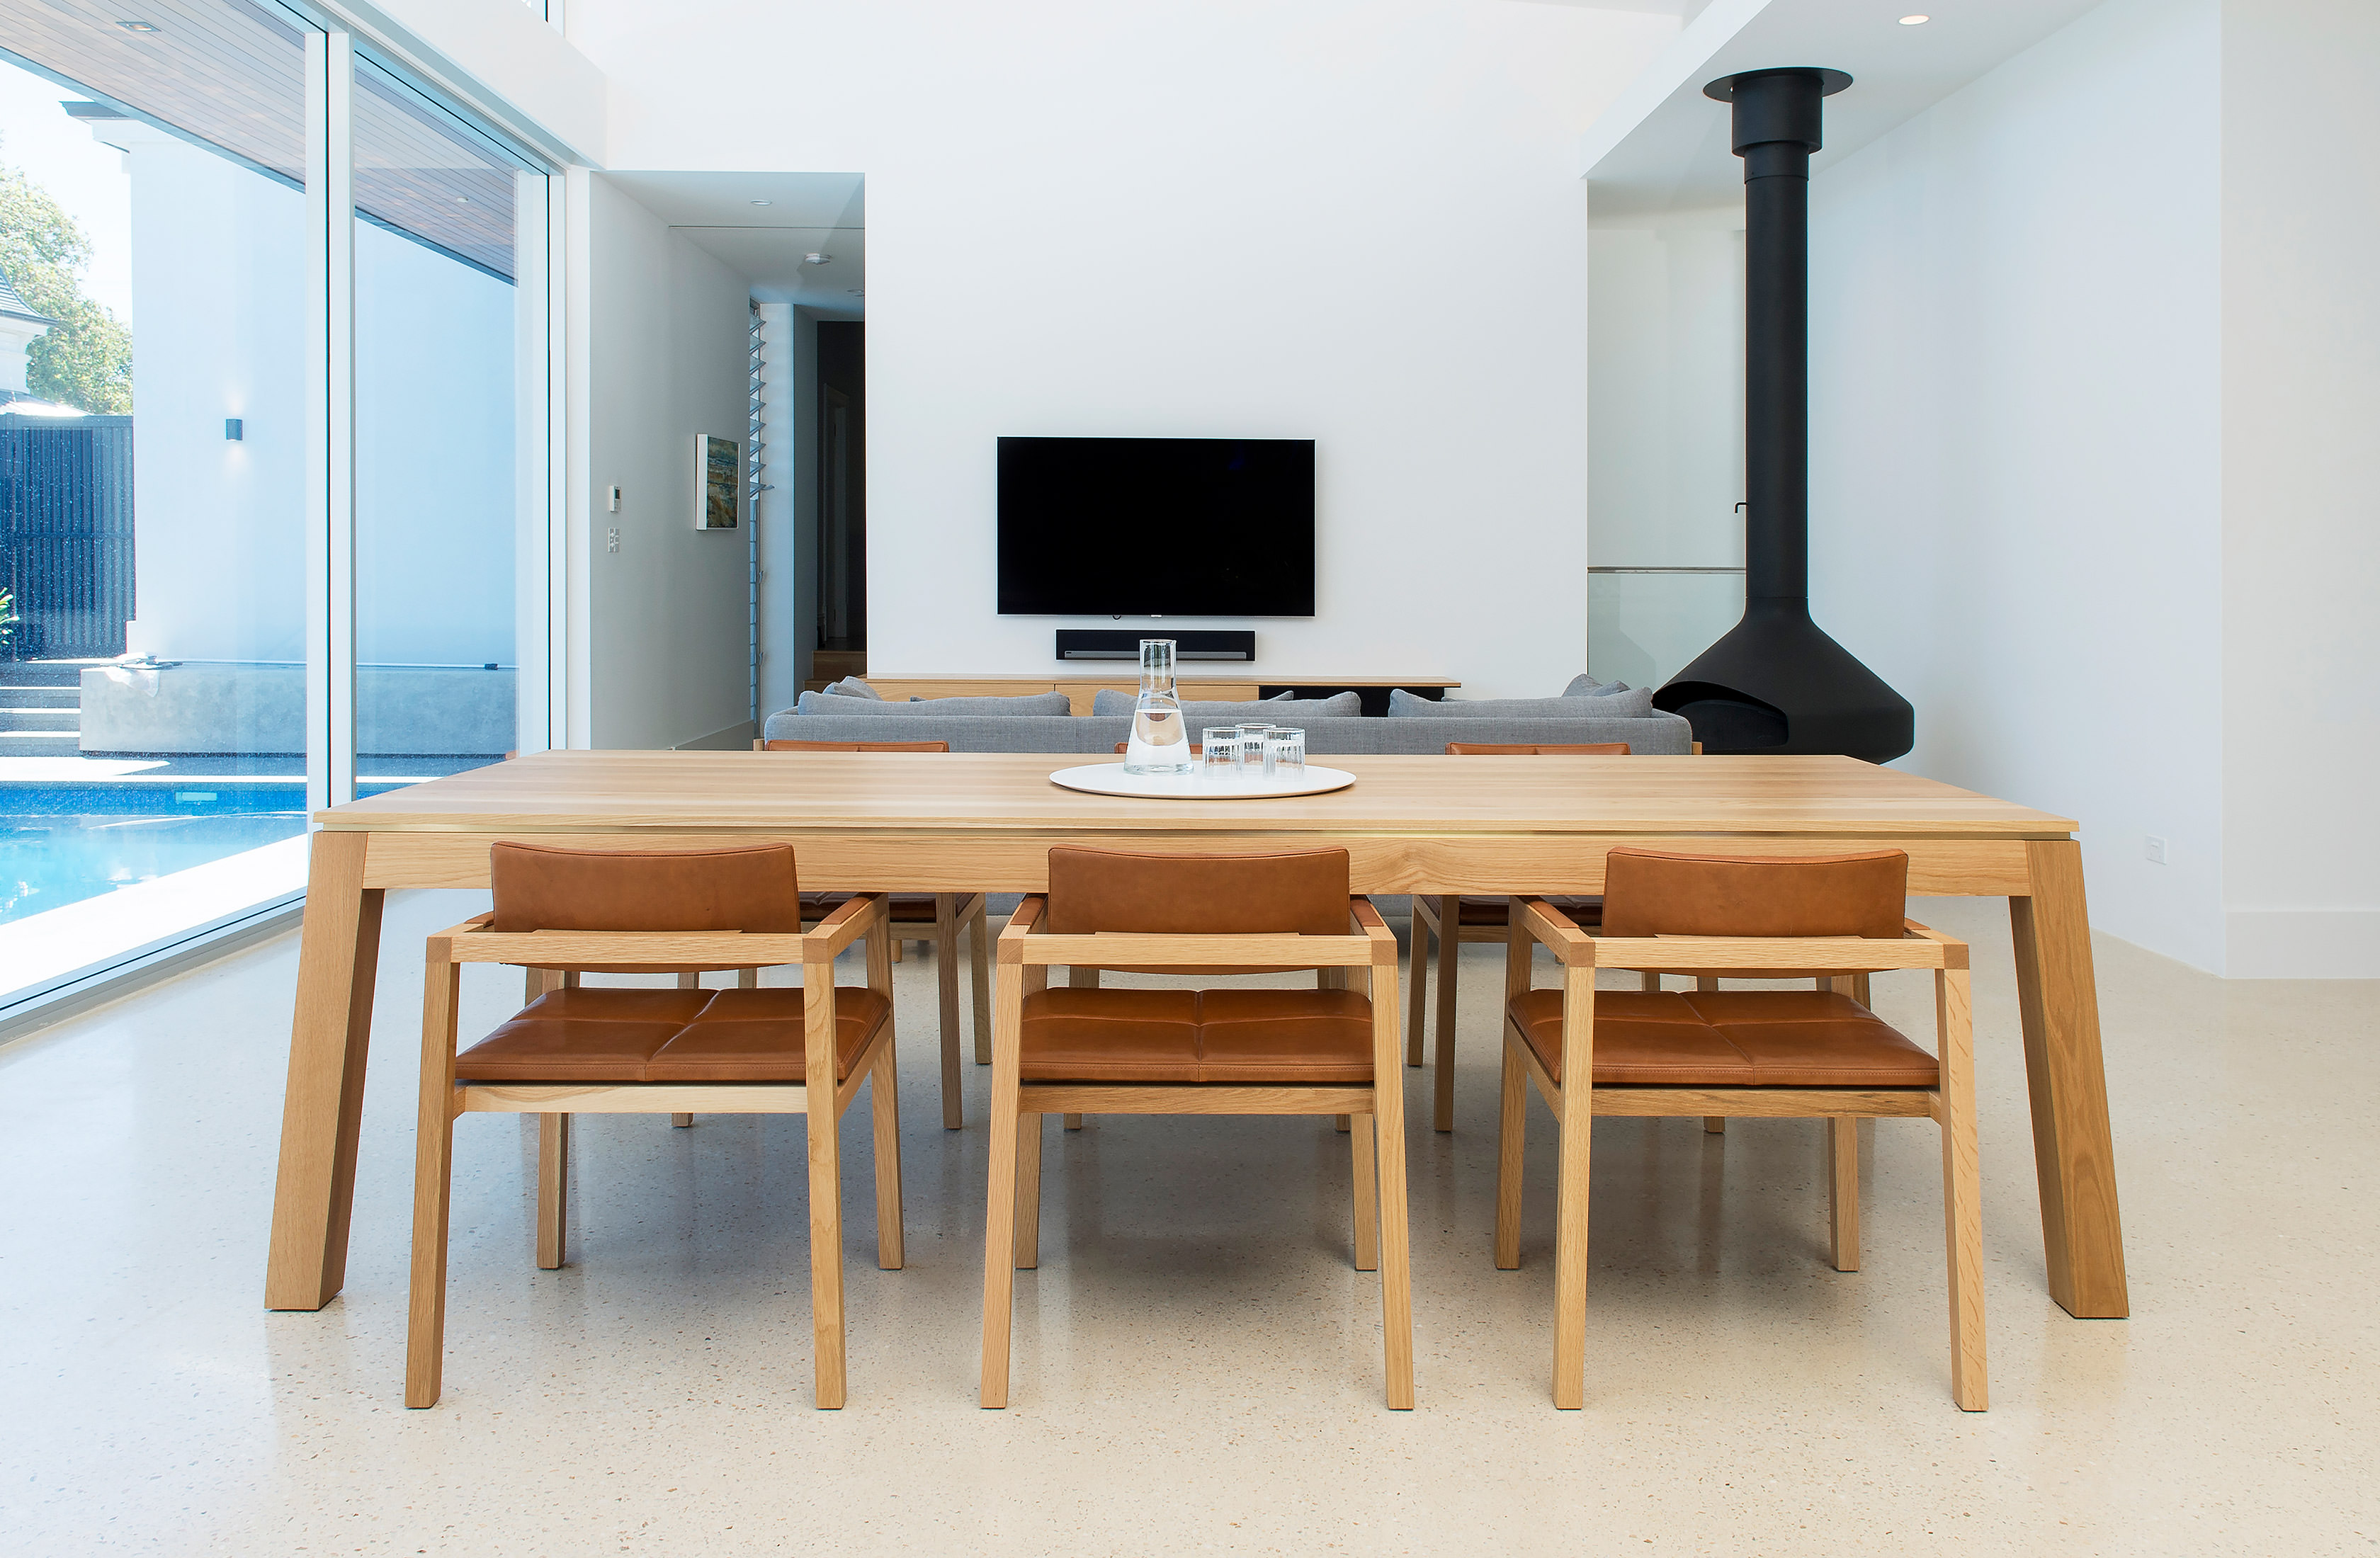 A beautifully modern home showcasing sensational minimalistic design all inclusive of this solid oak designer dining table and chairs by Australian designer FrancoCrea